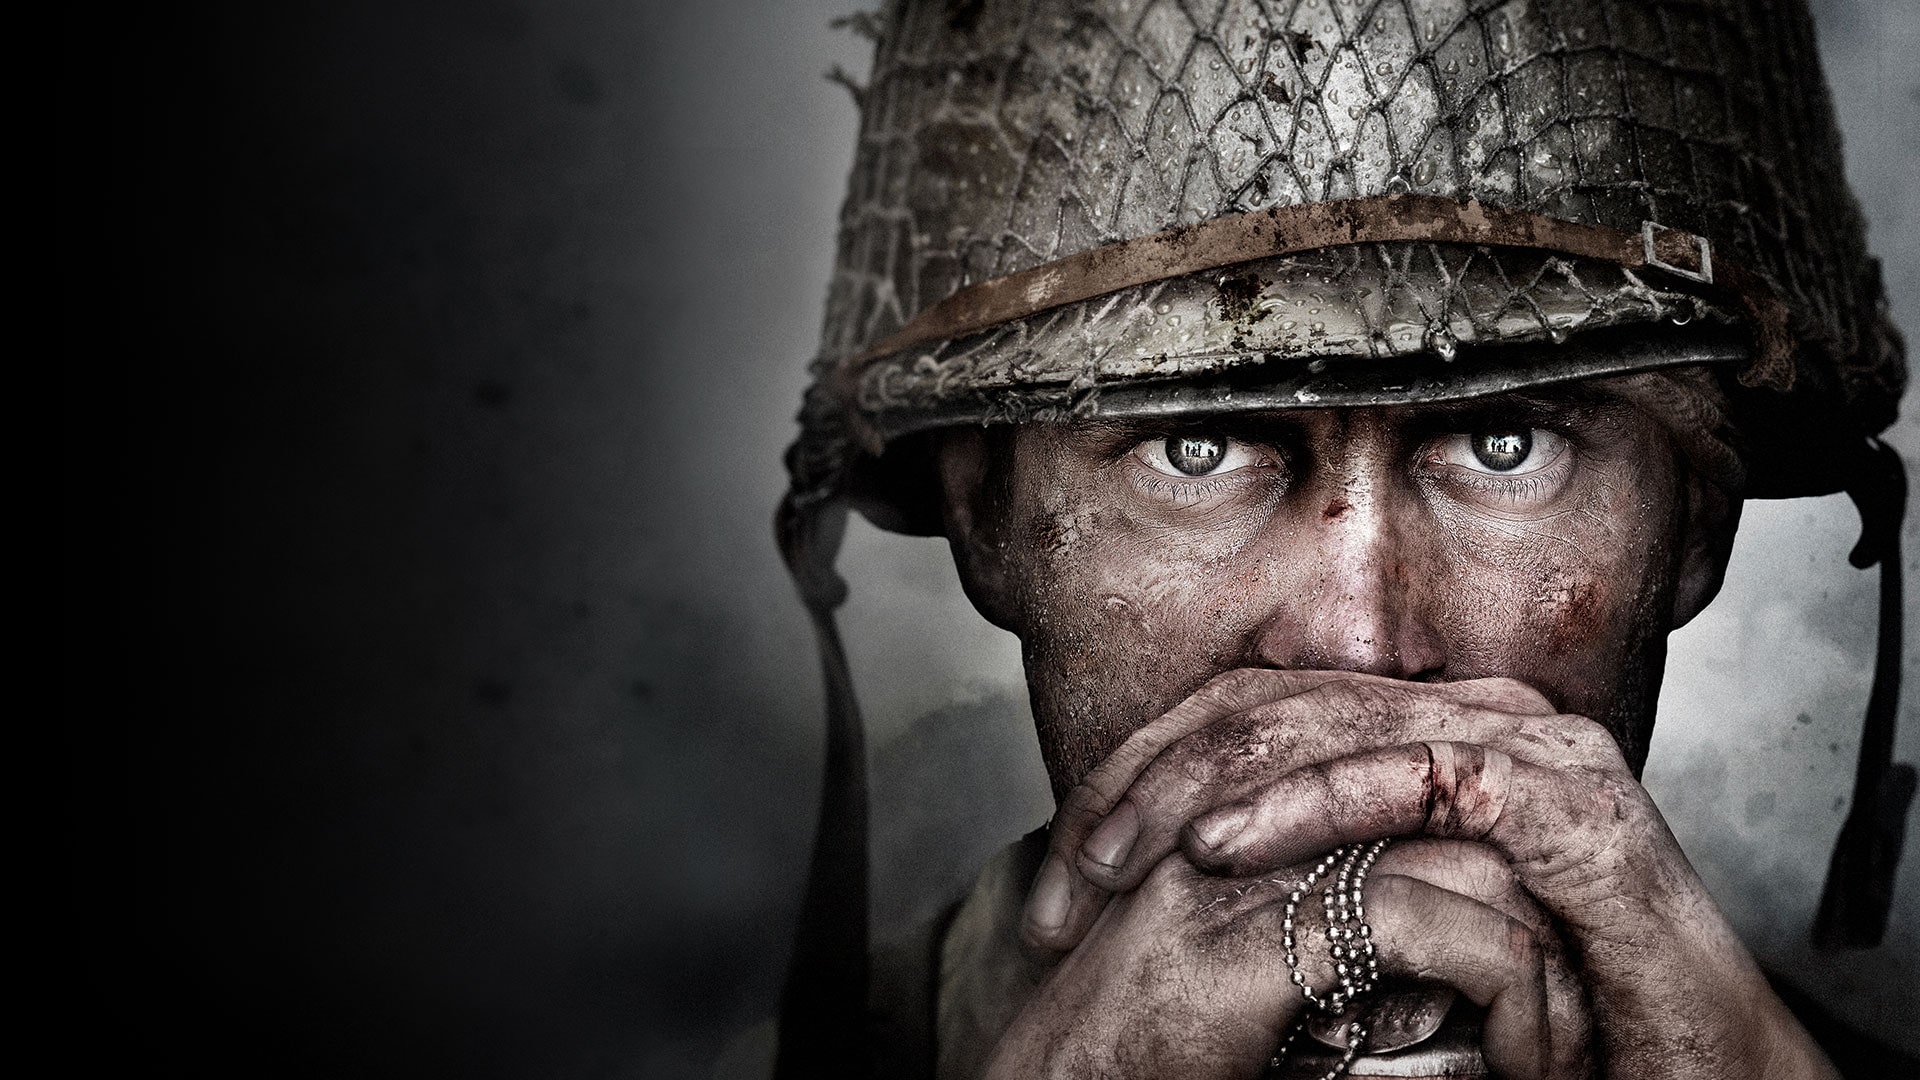 Call of Duty: WWII Digital Deluxe